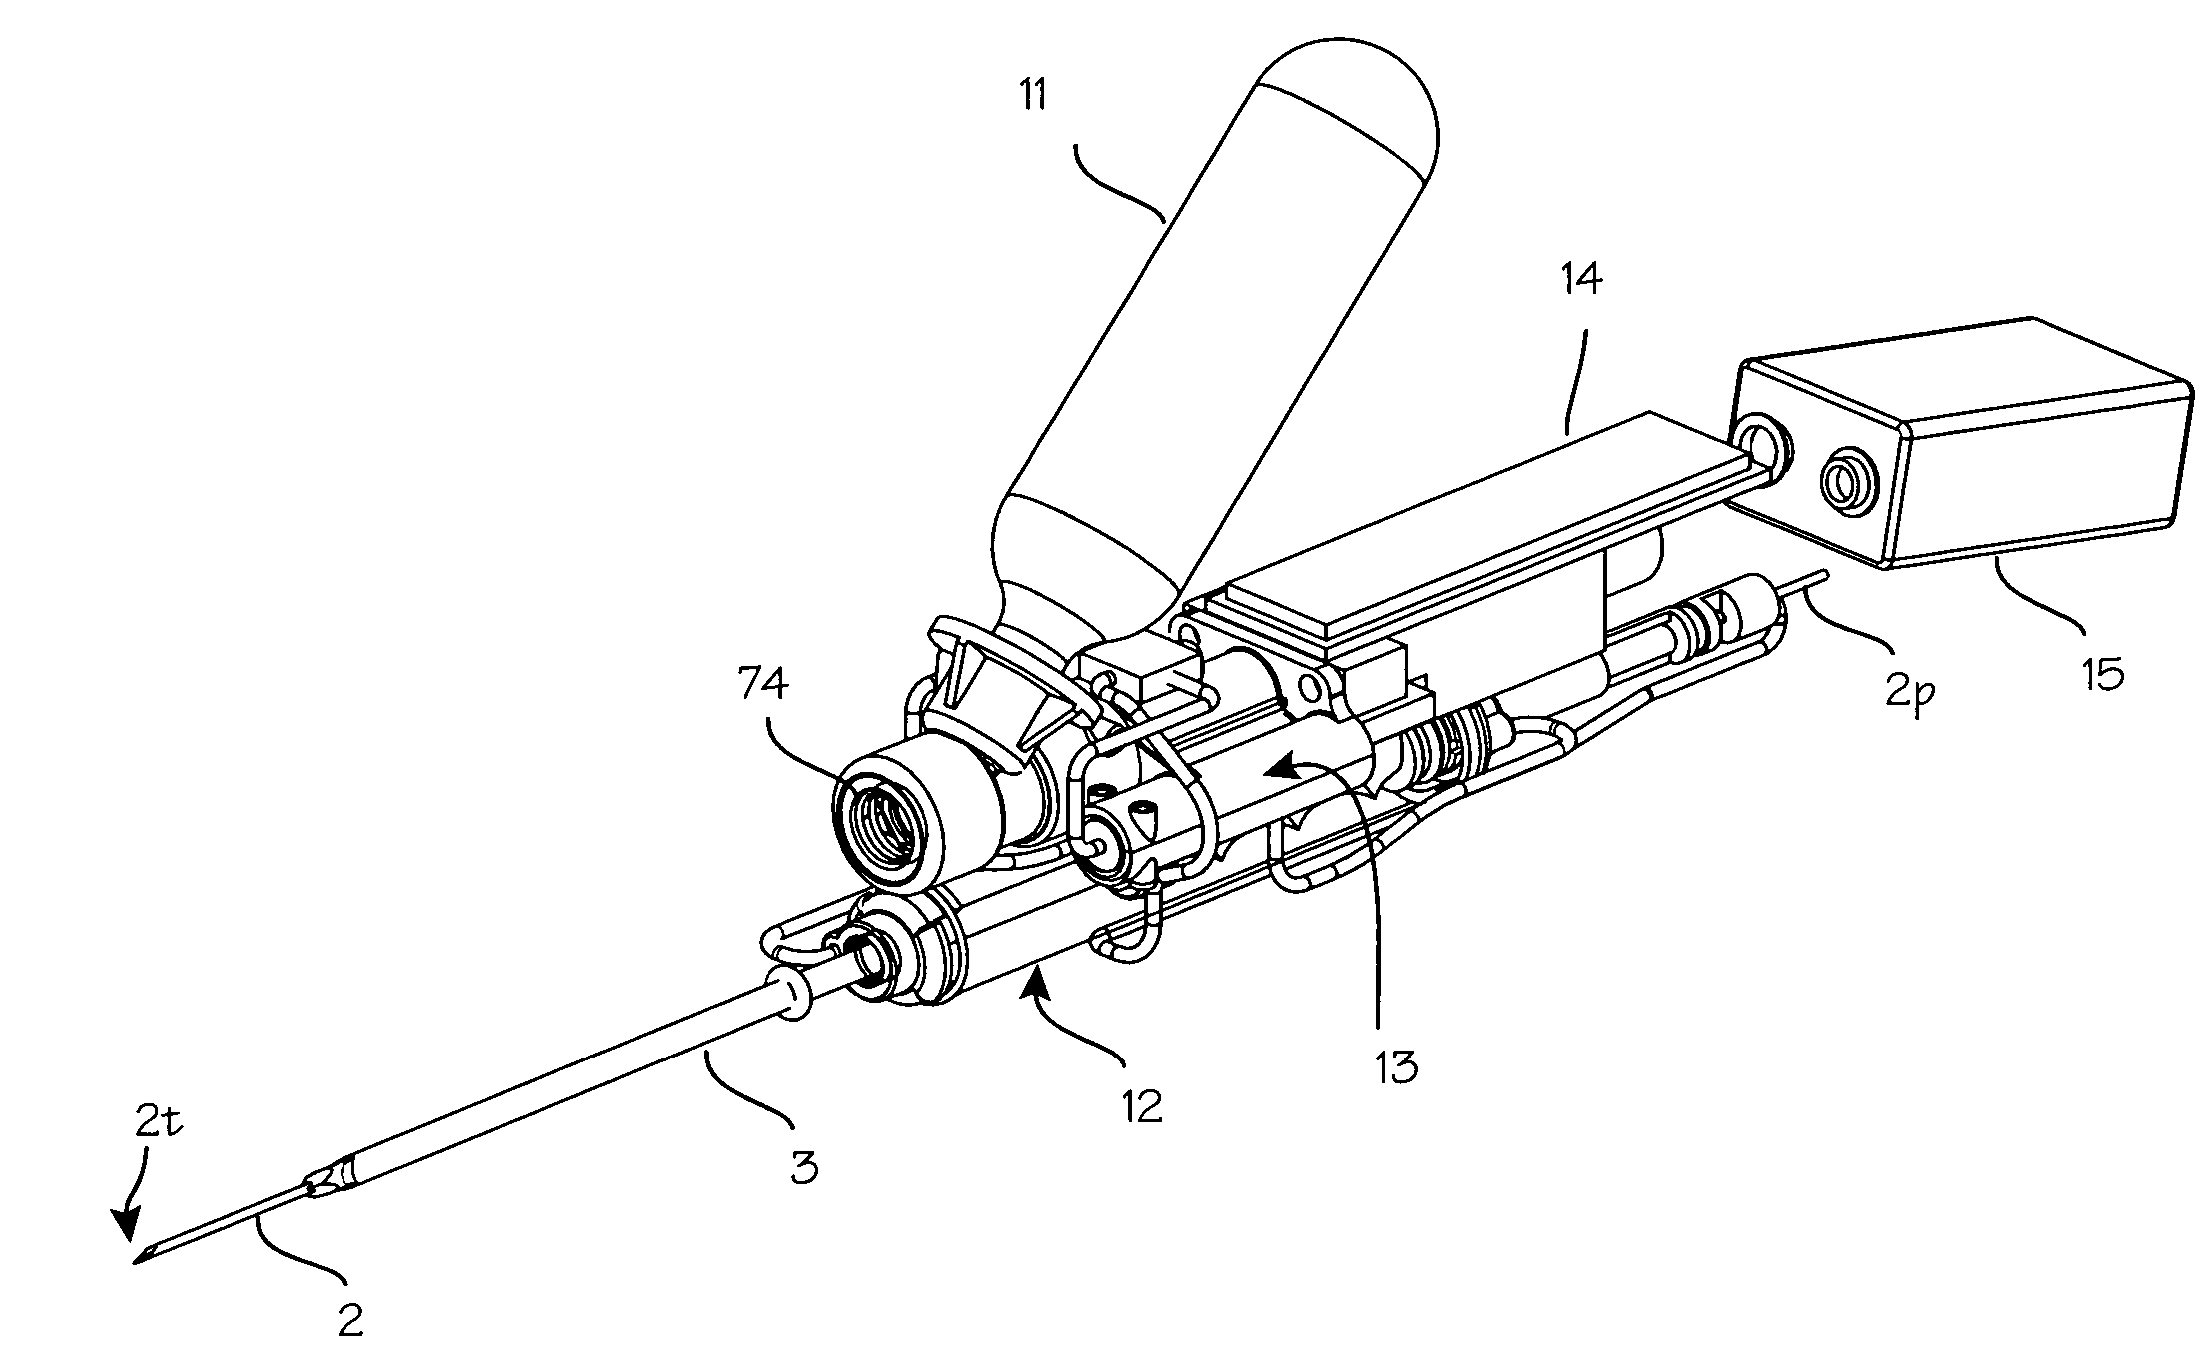 Rotational core biopsy device with liquid cryogen adhesion probe